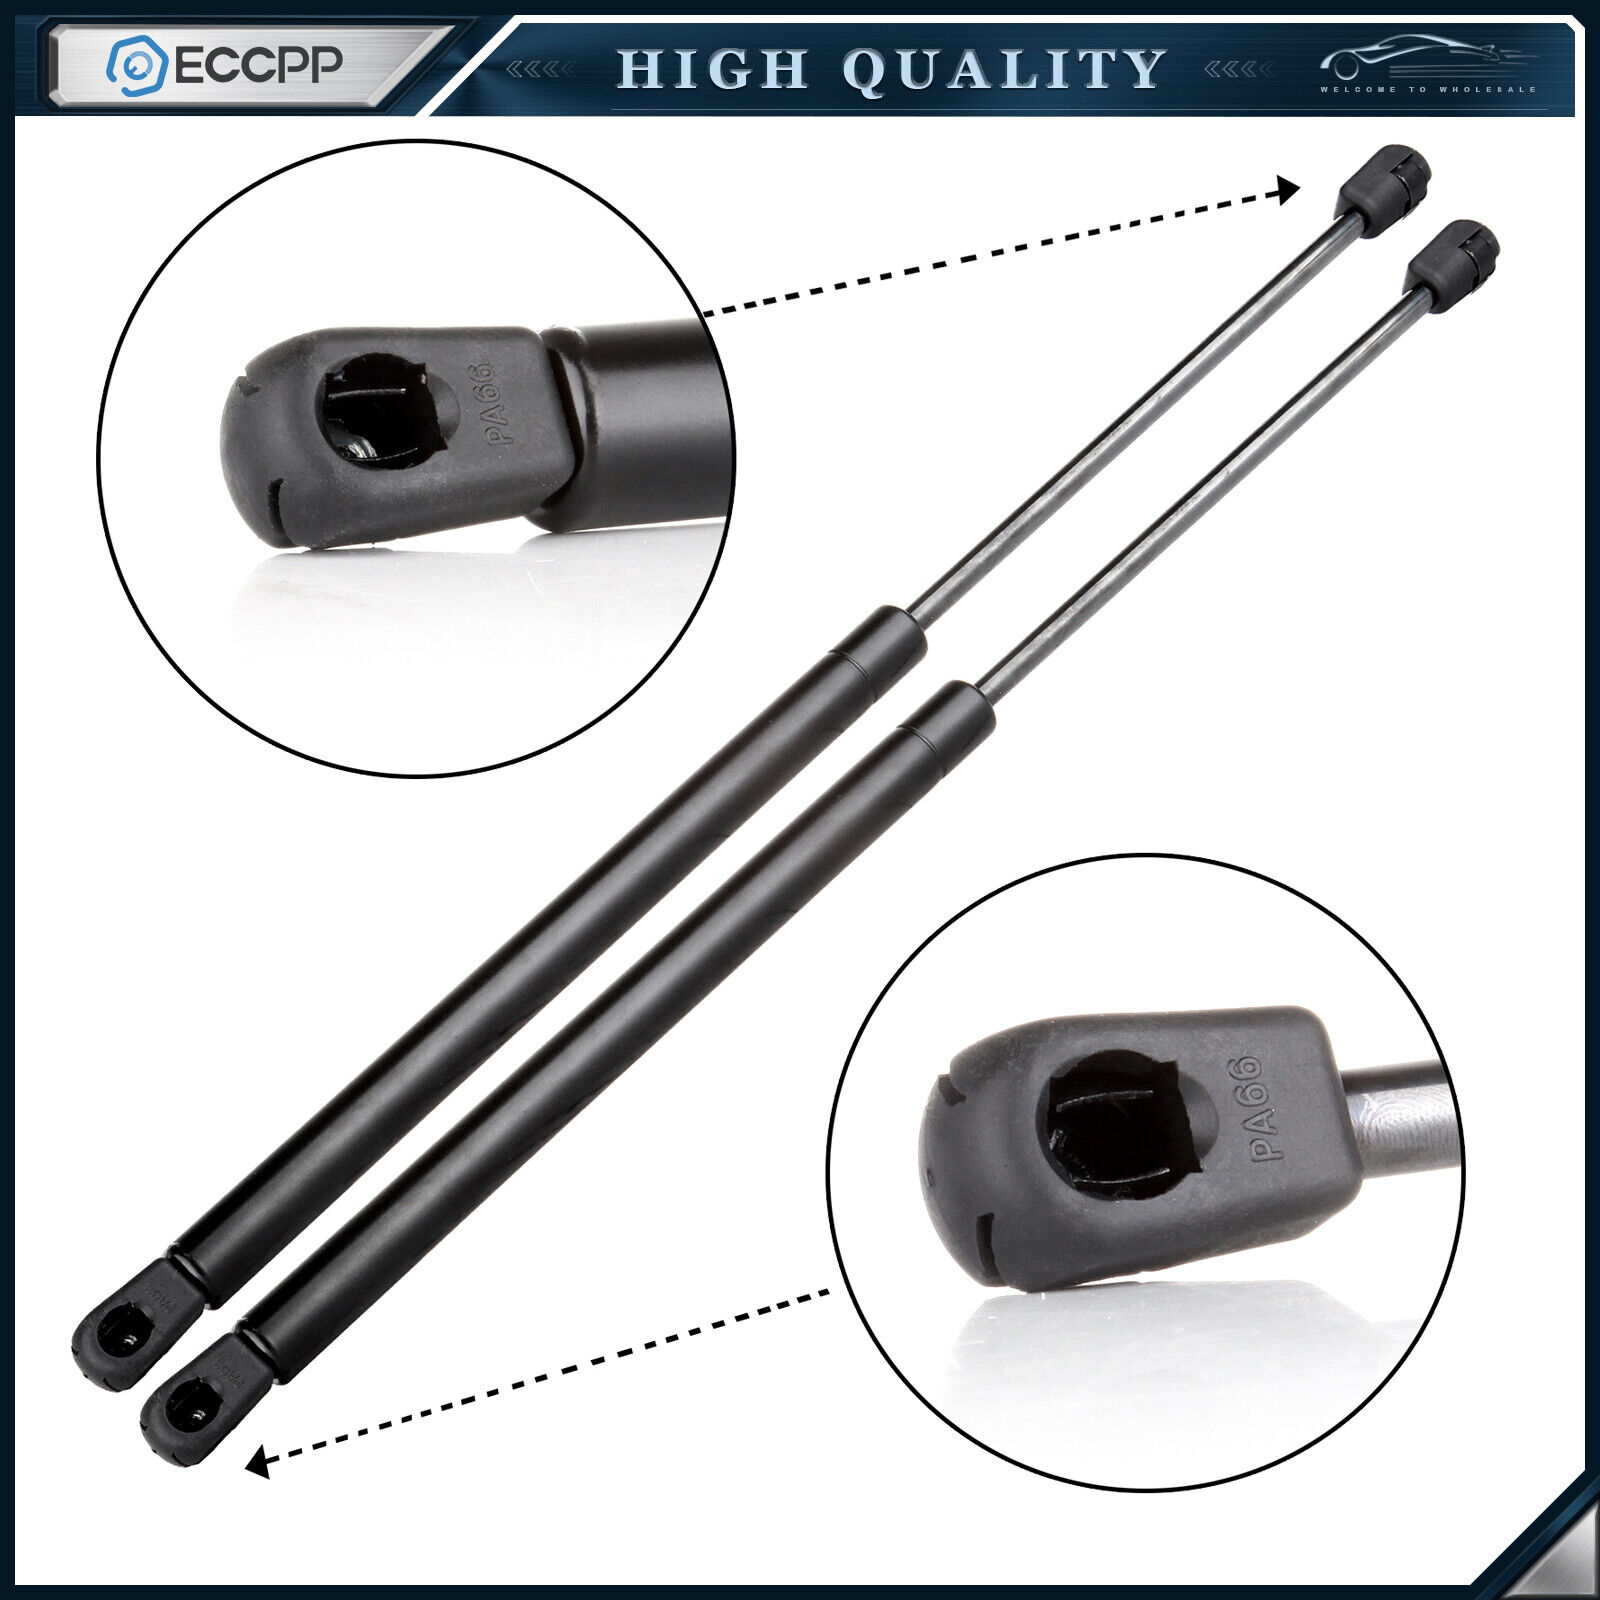 ECCPP 2x Hood Gas Charged Lift Supports Struts For Lincoln Navigator 98-02 4341